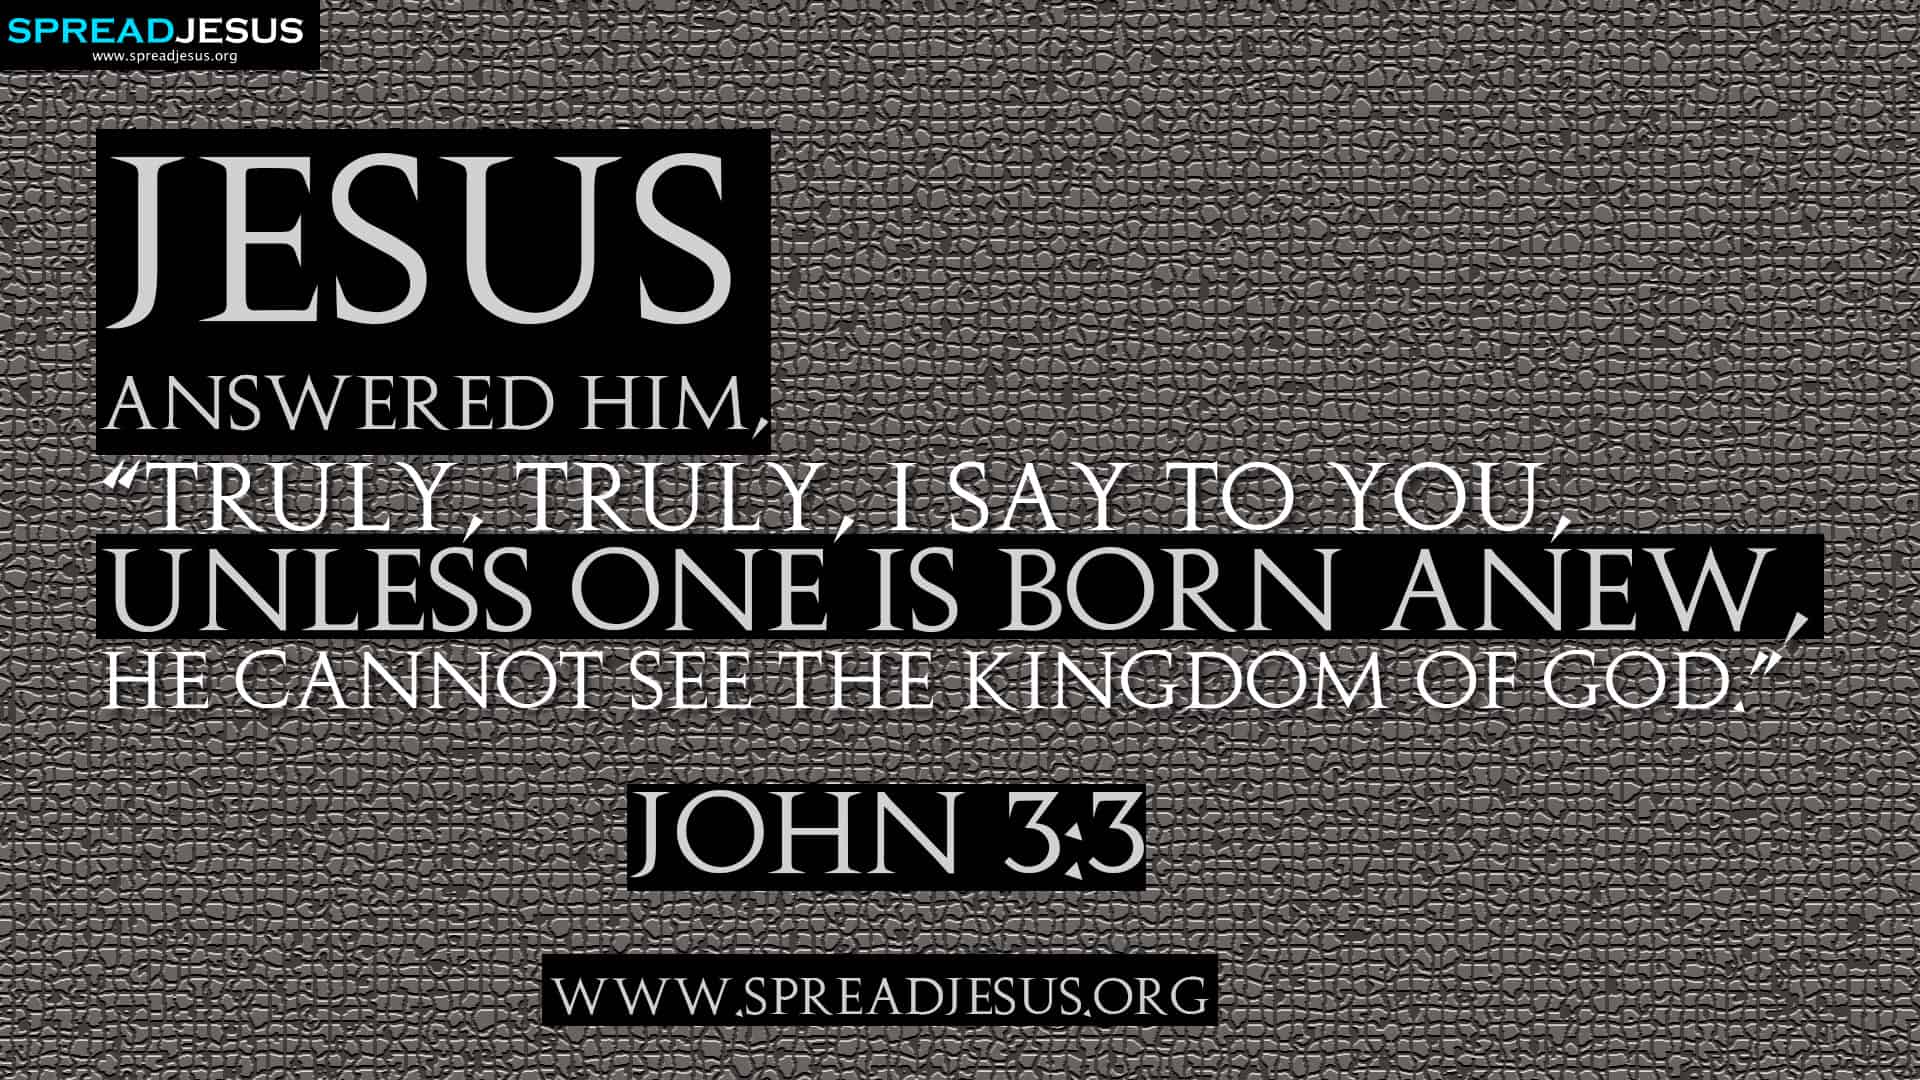 BIBLE QUOTES HD WALLPAPERS JOHN 3:3 FREE DOWNLOAD Jesus answered1920 x 1080